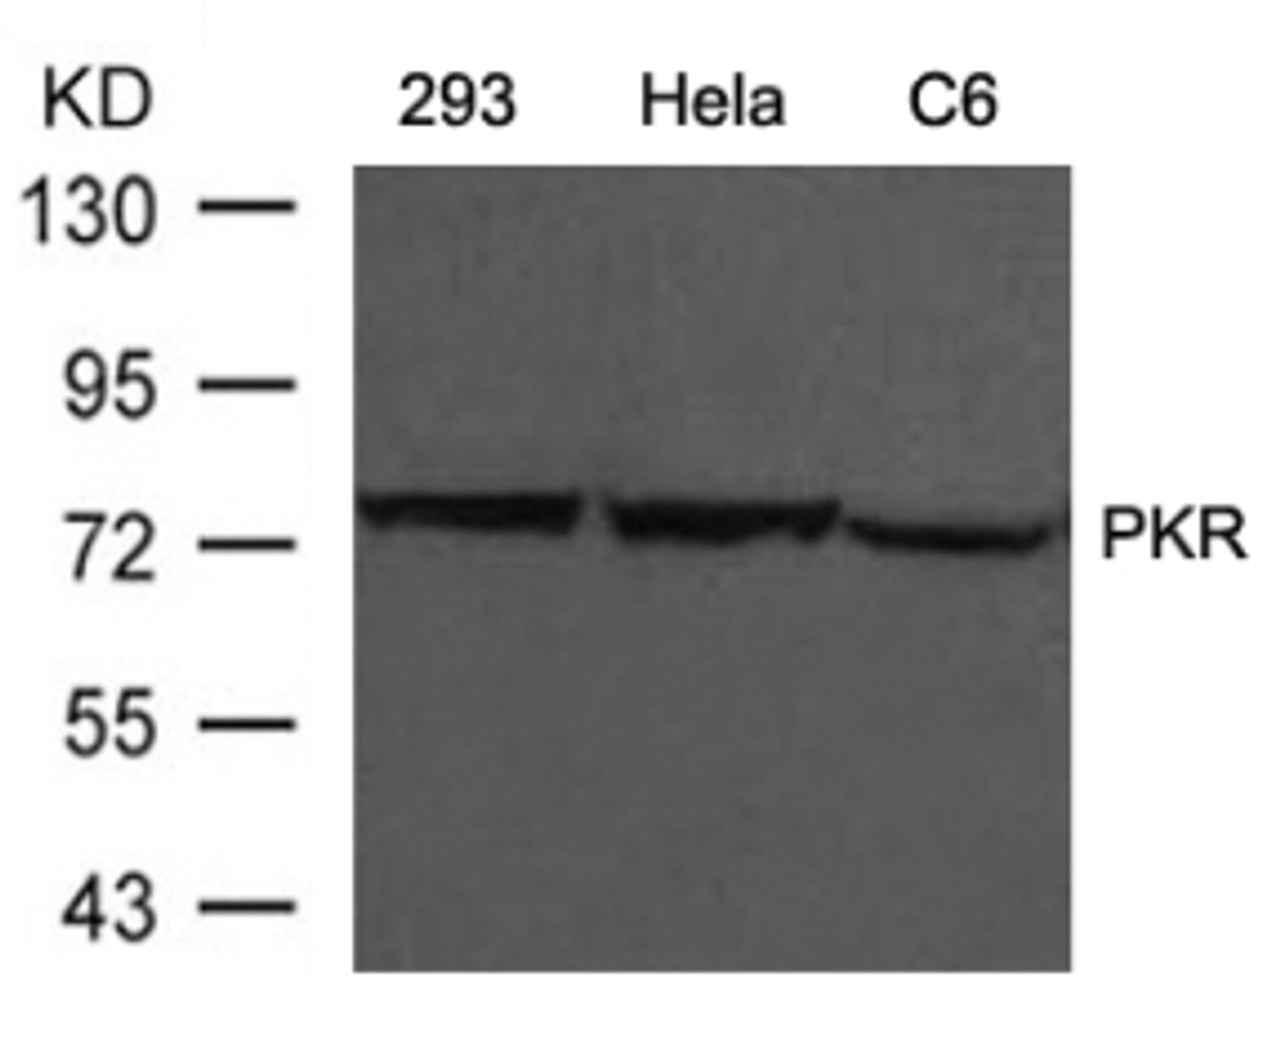 Western blot analysis of lysed extracts from 293, HeLa and C6 cells using PKR (Ab-446) .